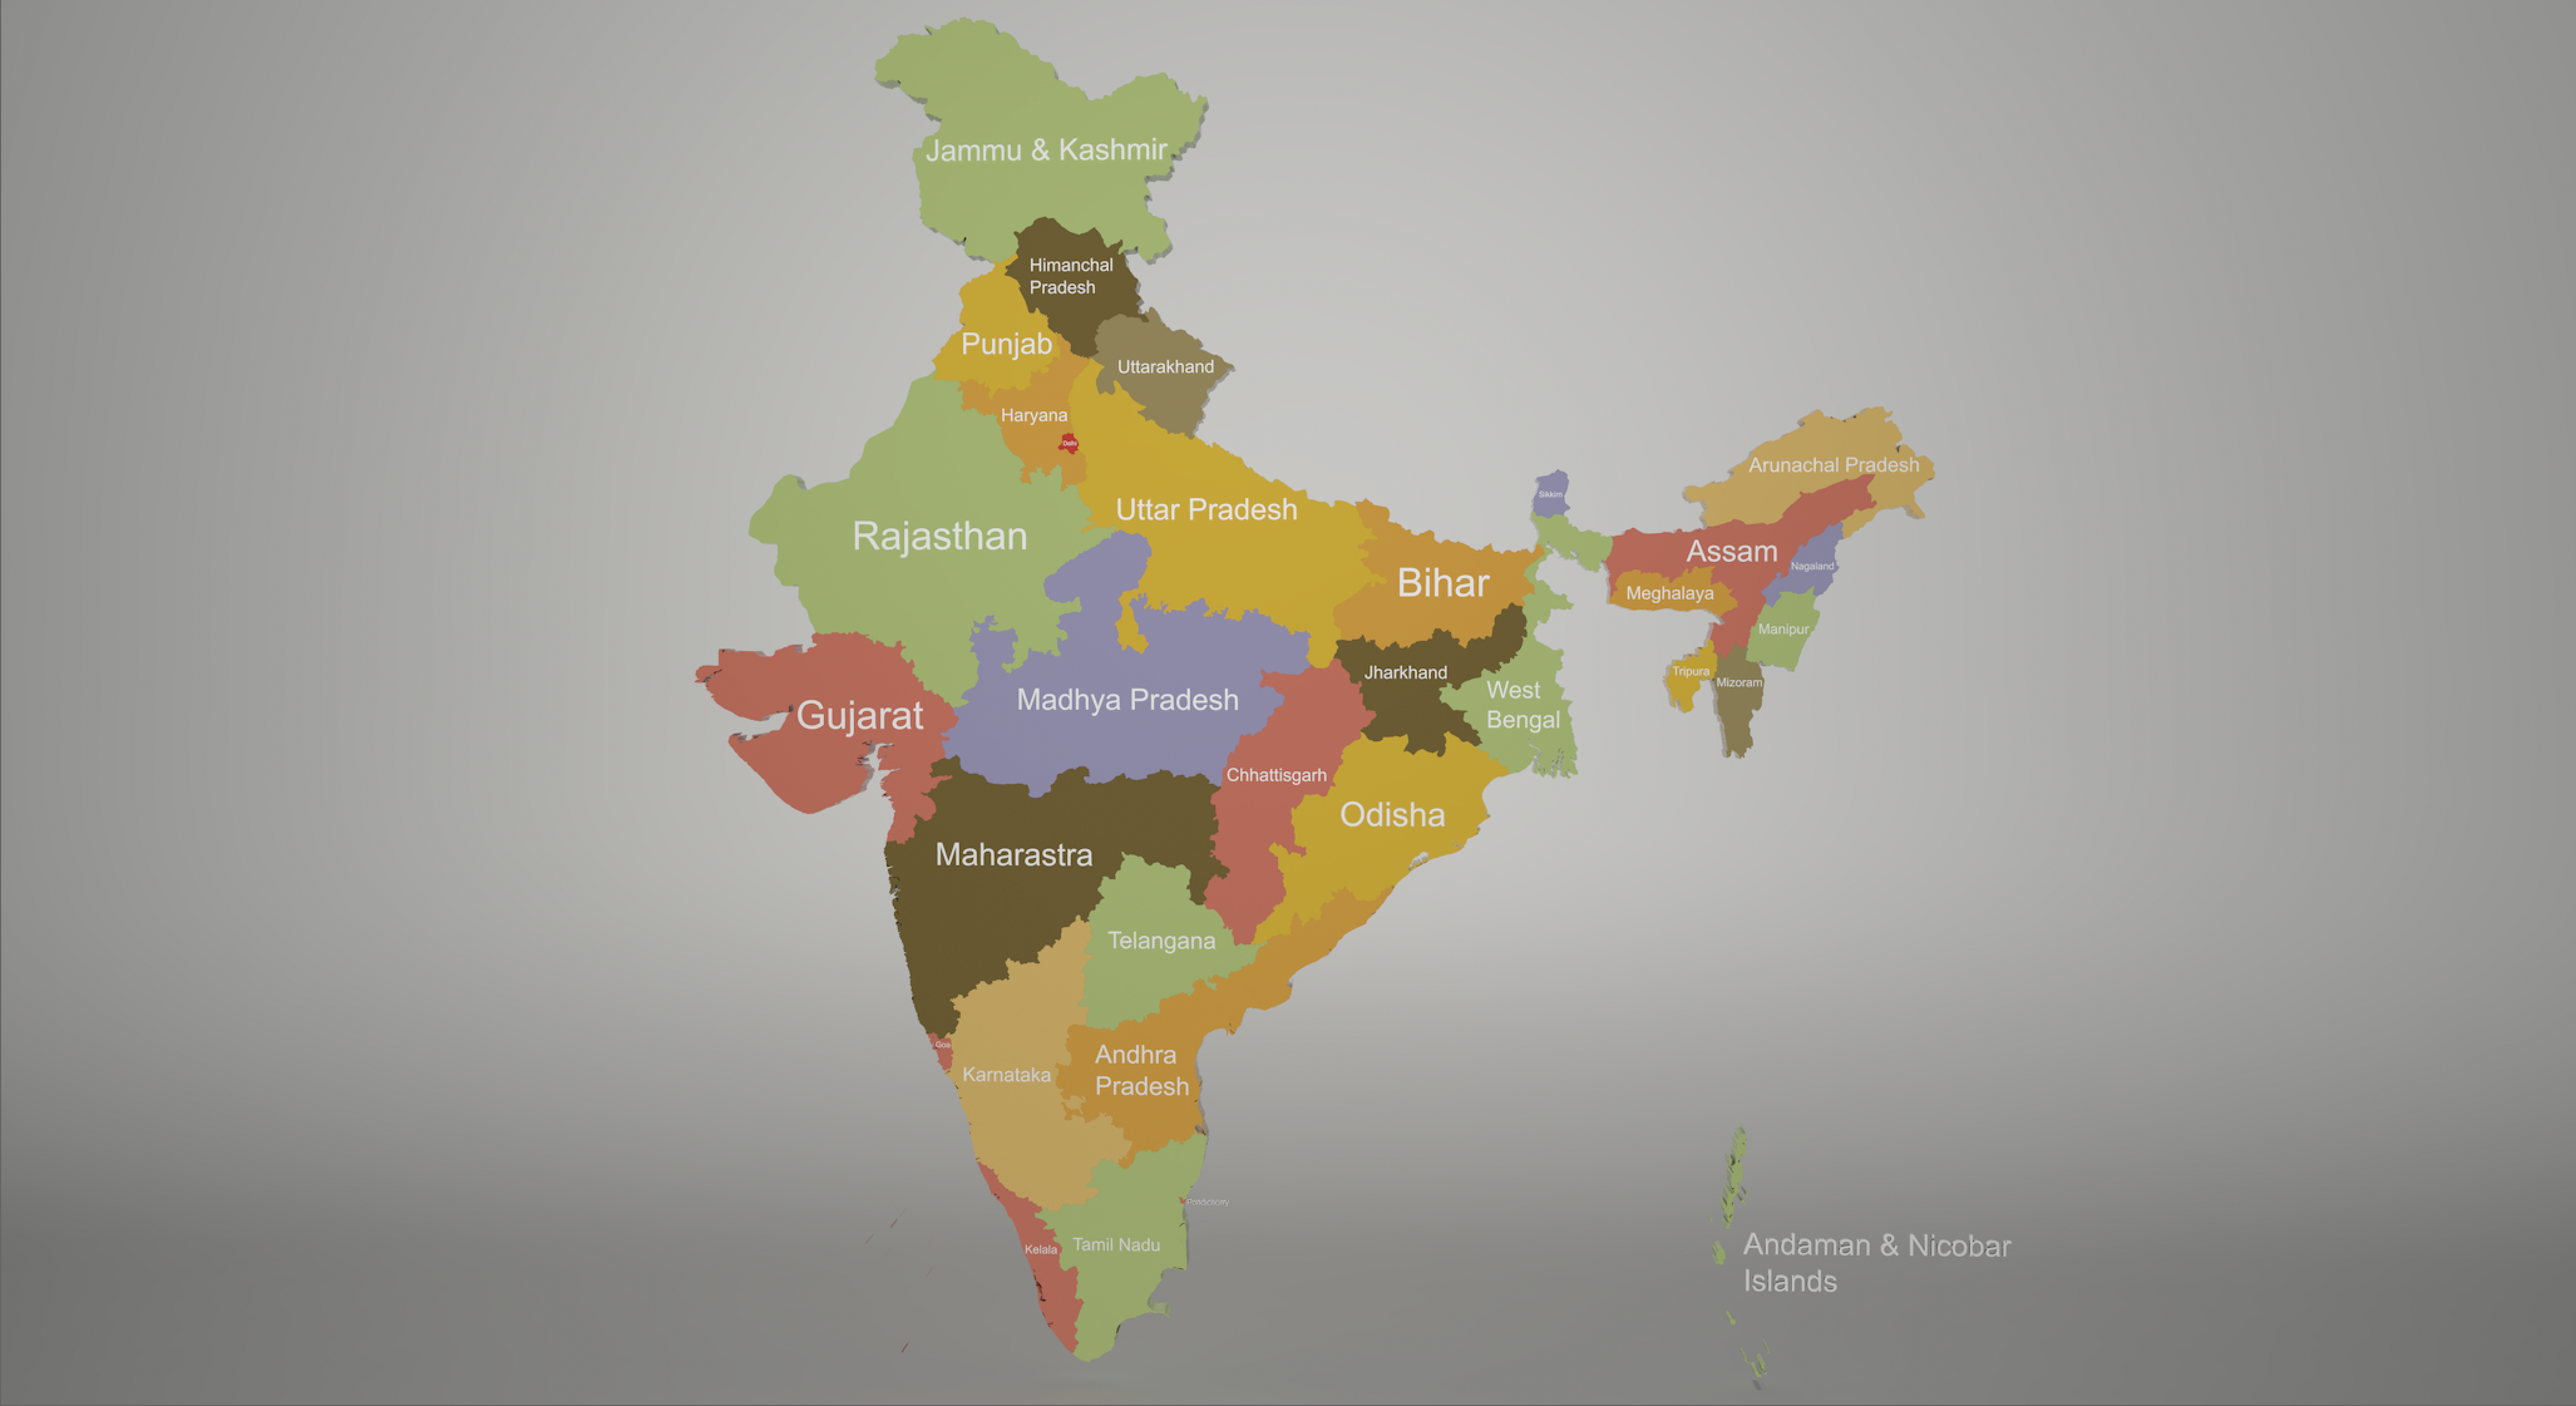 Outline Map of India | Free Vector Maps | India map, Map vector, Vector free